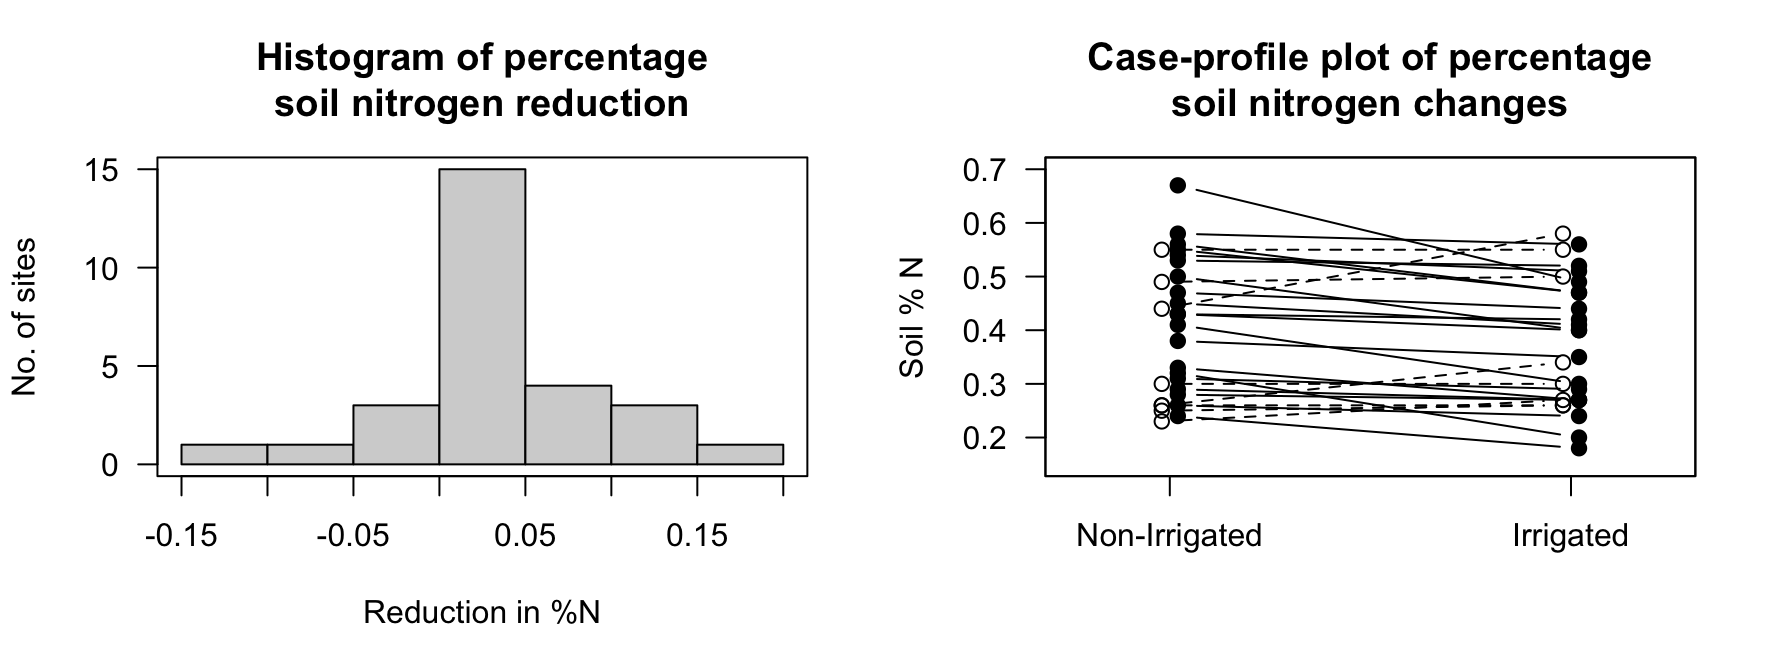 The reduction in \%N when sites are irrigated, compared to non-irrigated. Left: A histogram of the differences (boundary values in the lower box). Right: a case-profile plot (solid lines, solid dots for lower percentage N in irrigated sites).